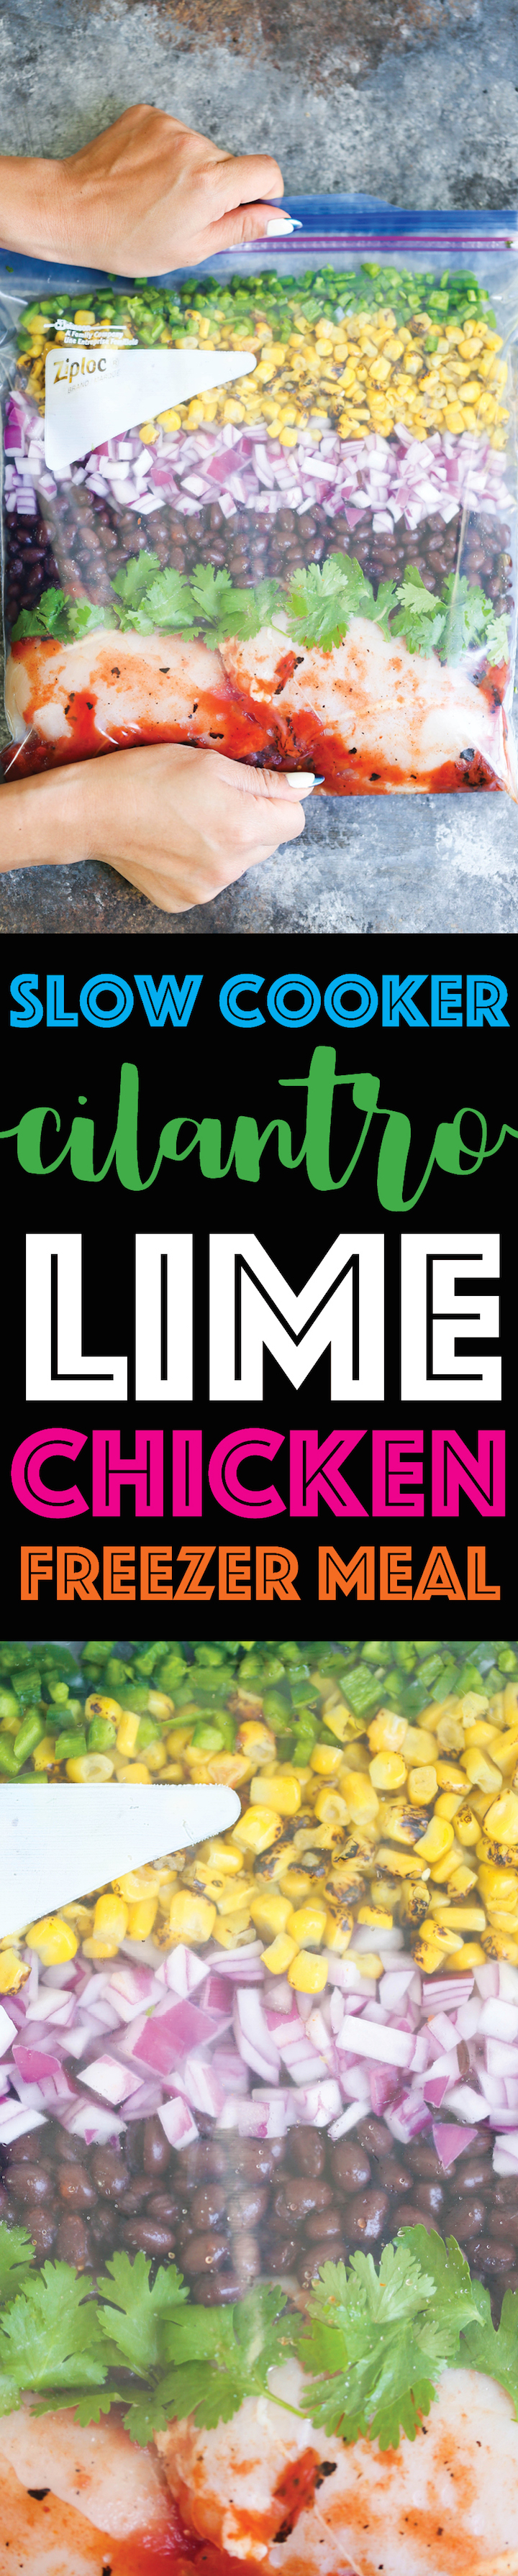 Slow Cooker Cilantro Lime Chicken - Stock your freezer with the easiest, quickest crockpot FREEZER MEAL!!! Simply drop into the crockpot and you're set!!!